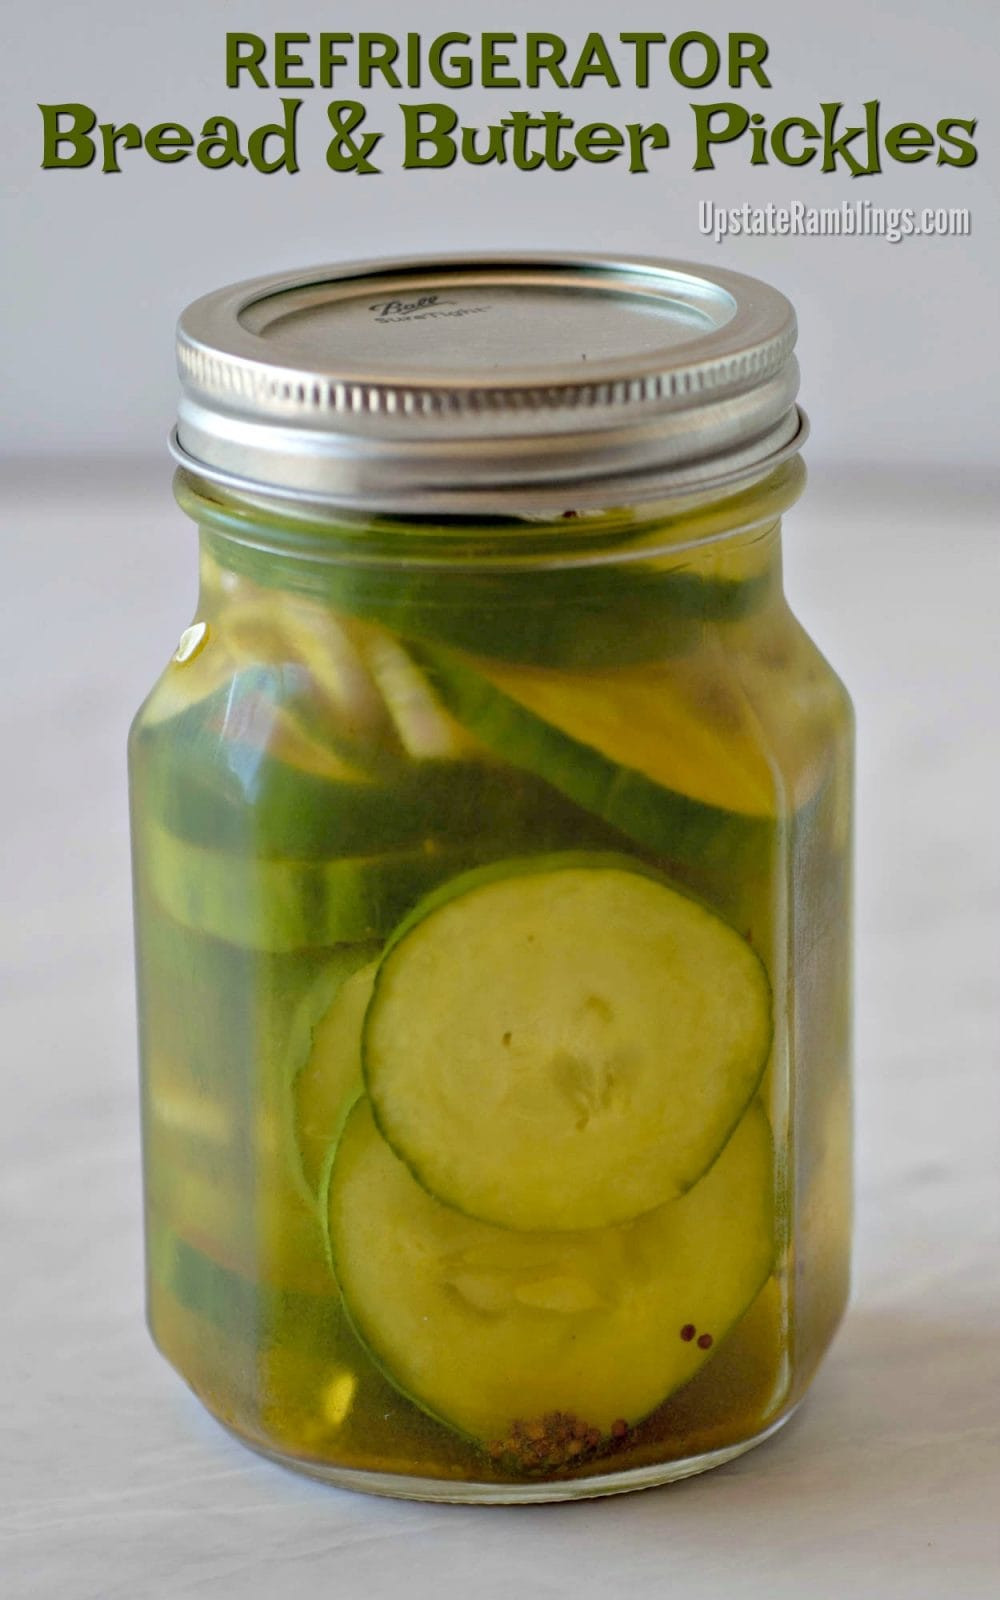 Bread And Butter Pickles Recipe No Canning
 Refrigerator Bread and Butter Pickles Upstate Ramblings